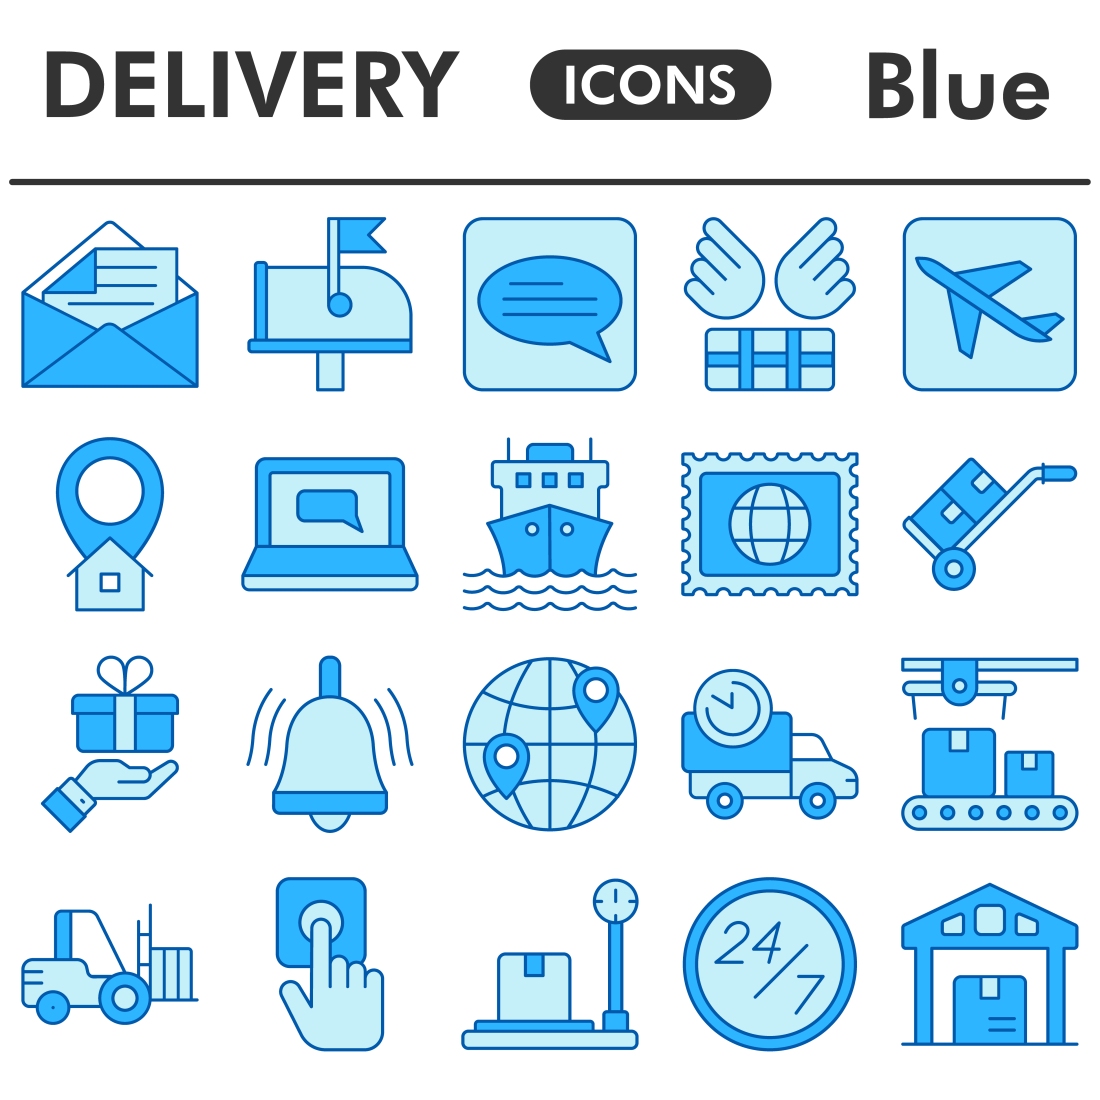 Delivery icons set, blue style preview image.